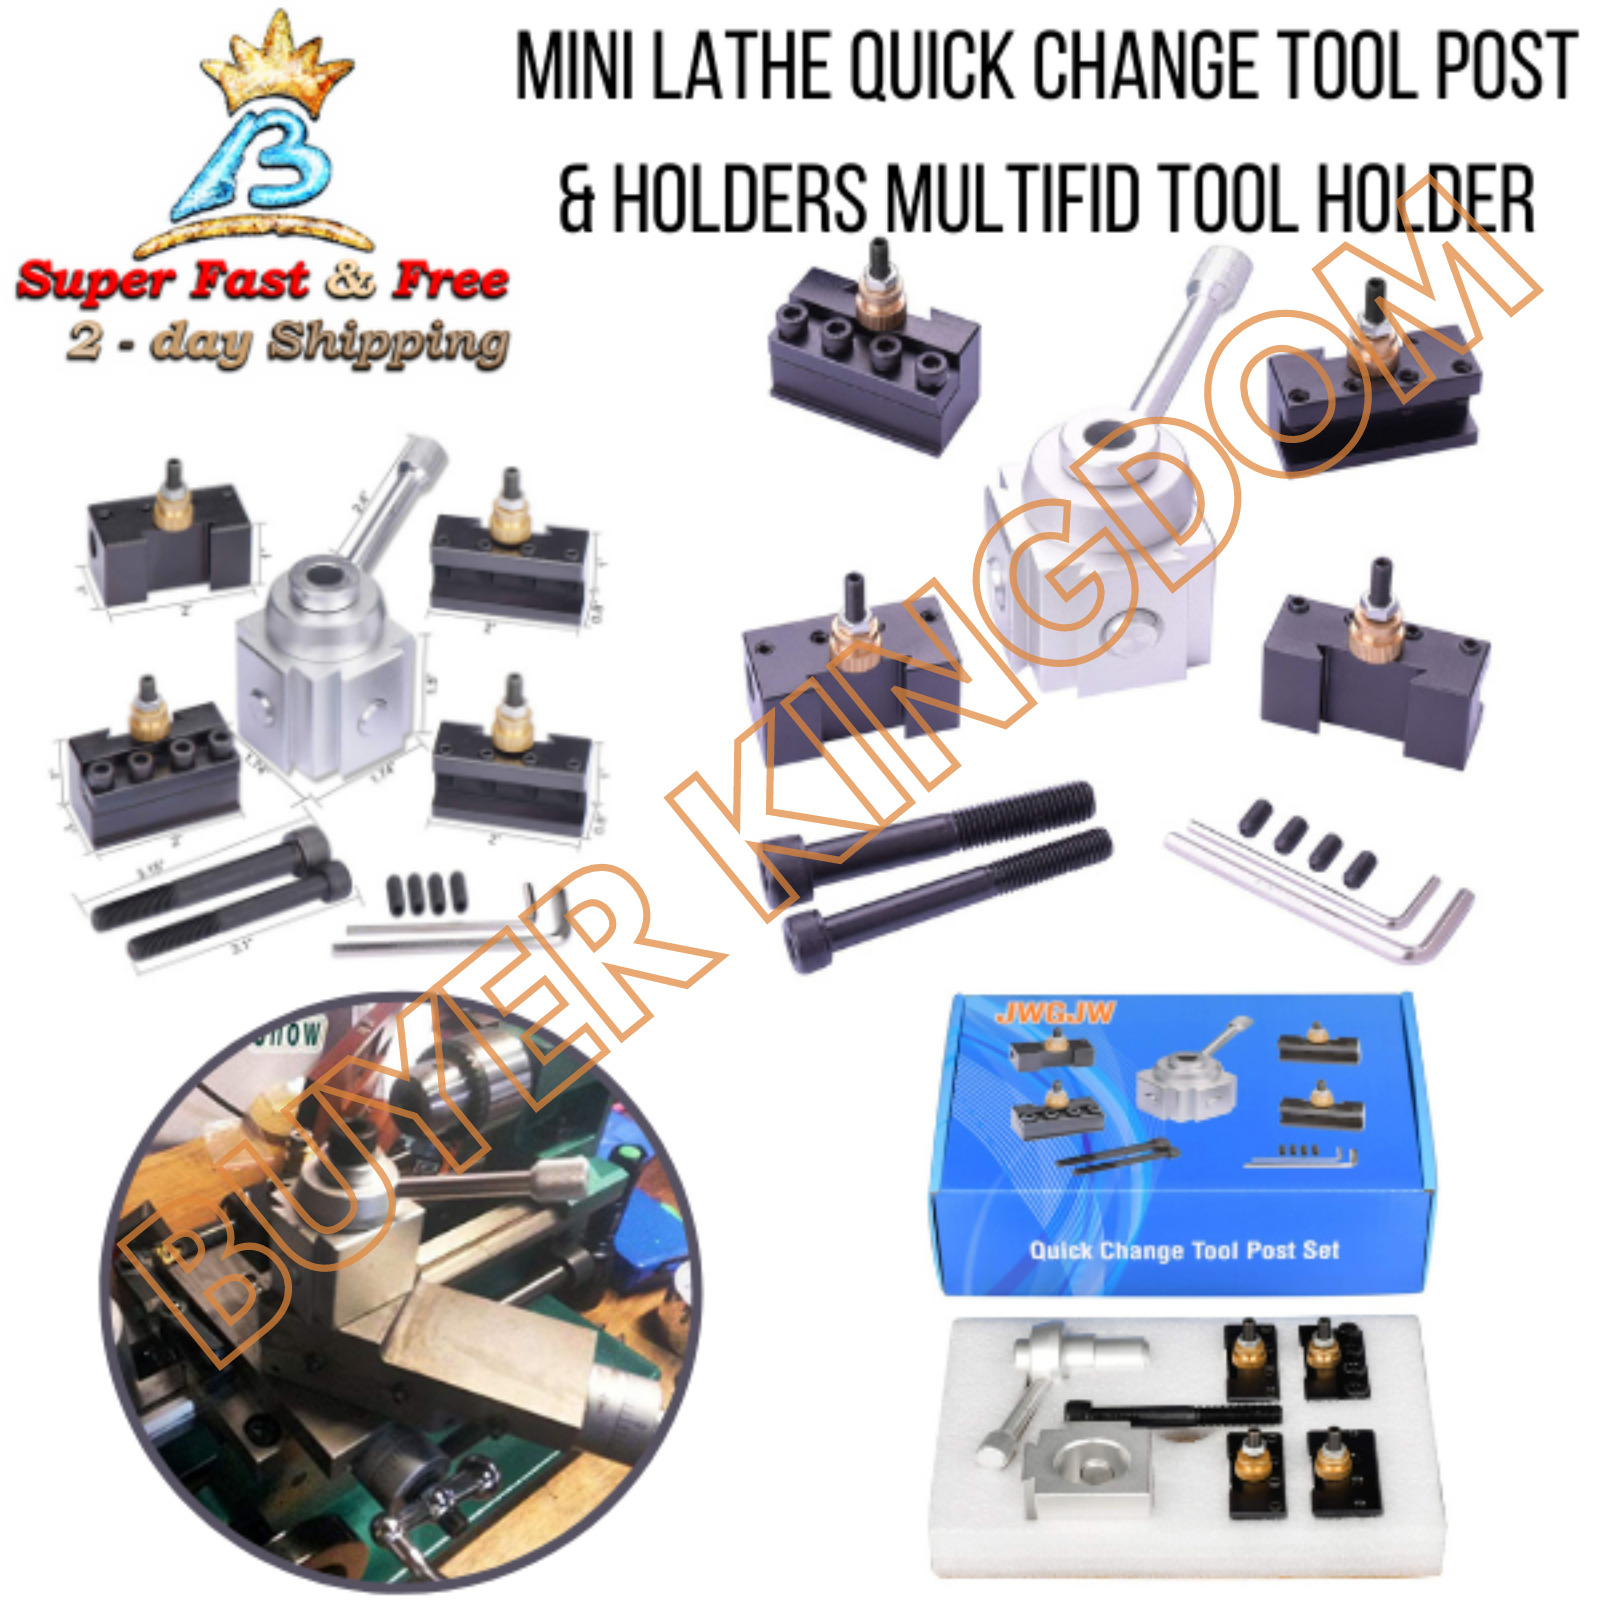 9pc Multi Use Mini Lathe Quick Change Steel Tool Post & Holders Tooling Package